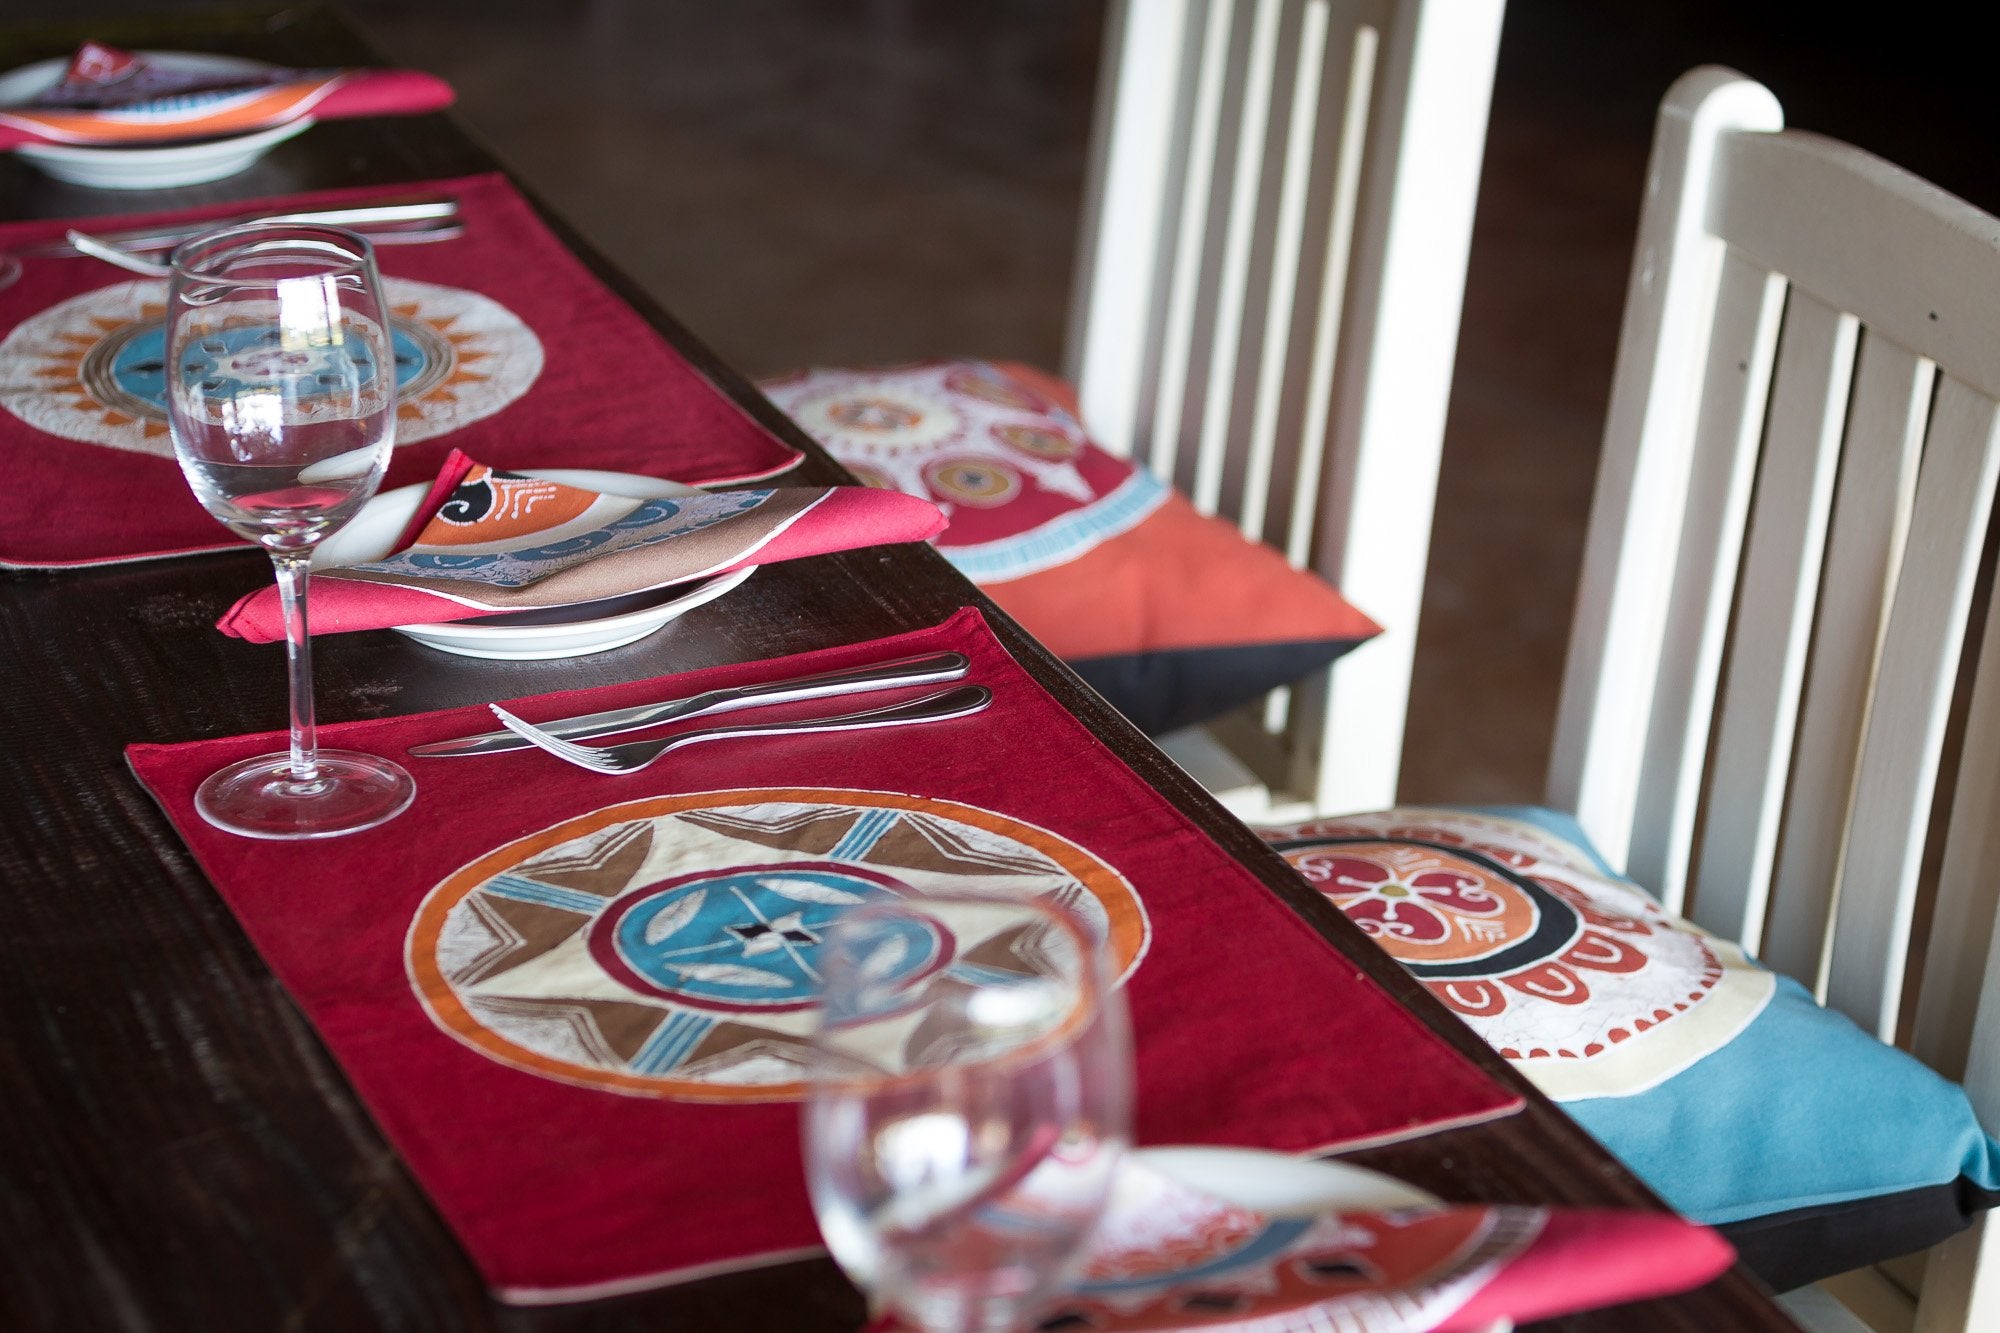 Hand-painted Napkins with smoke African Circles